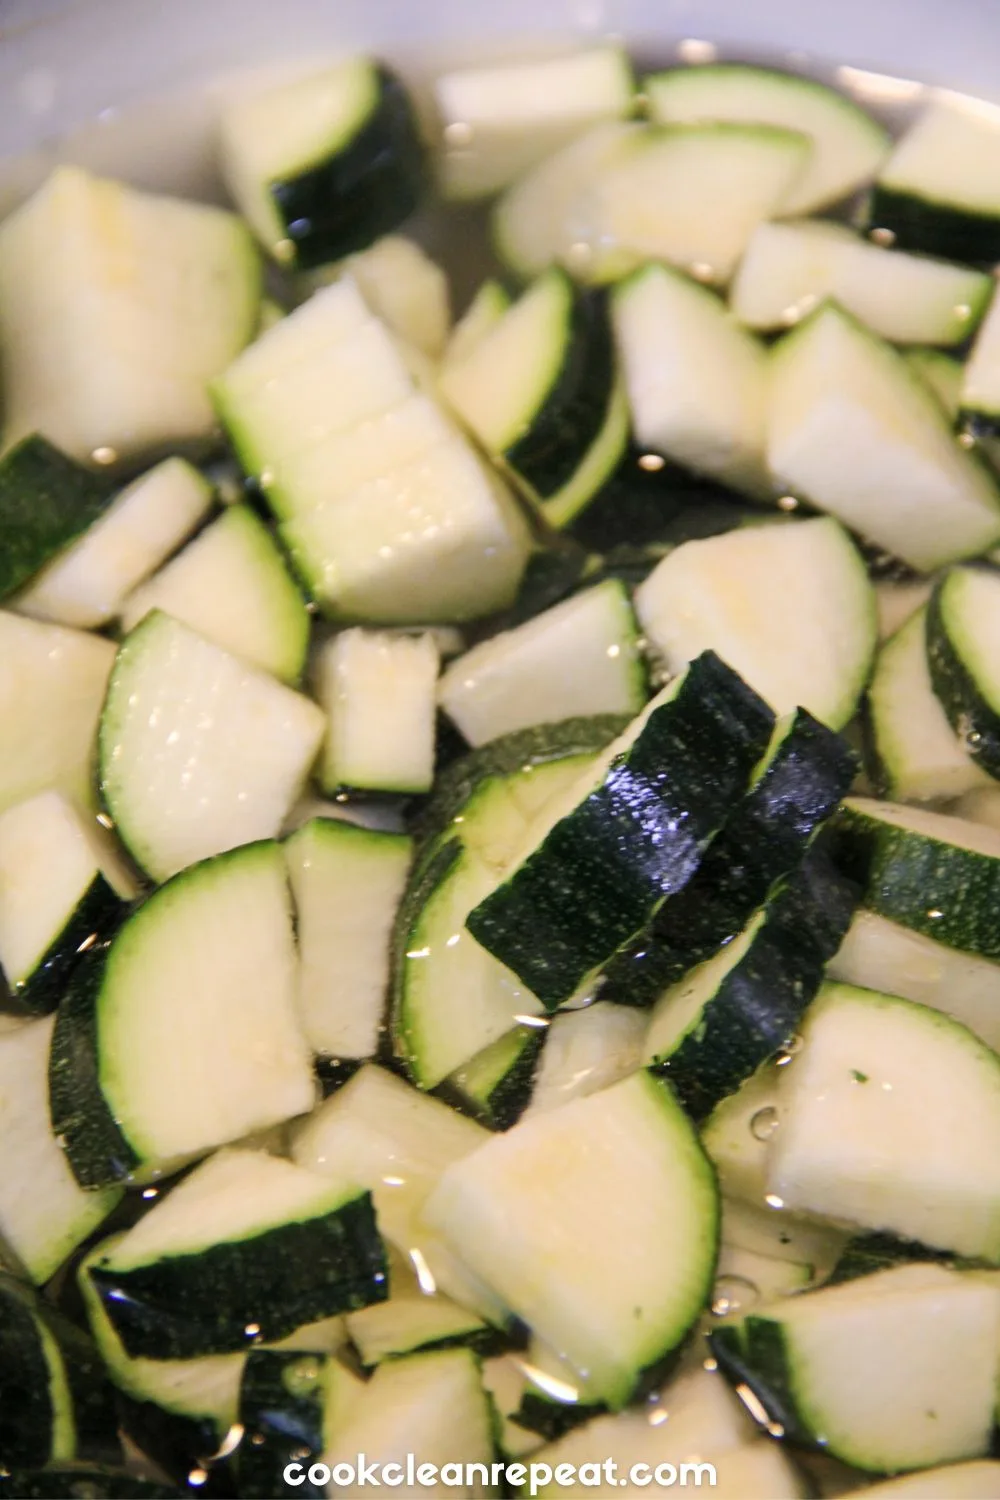 a close up photo of cut up pieces of zucchini